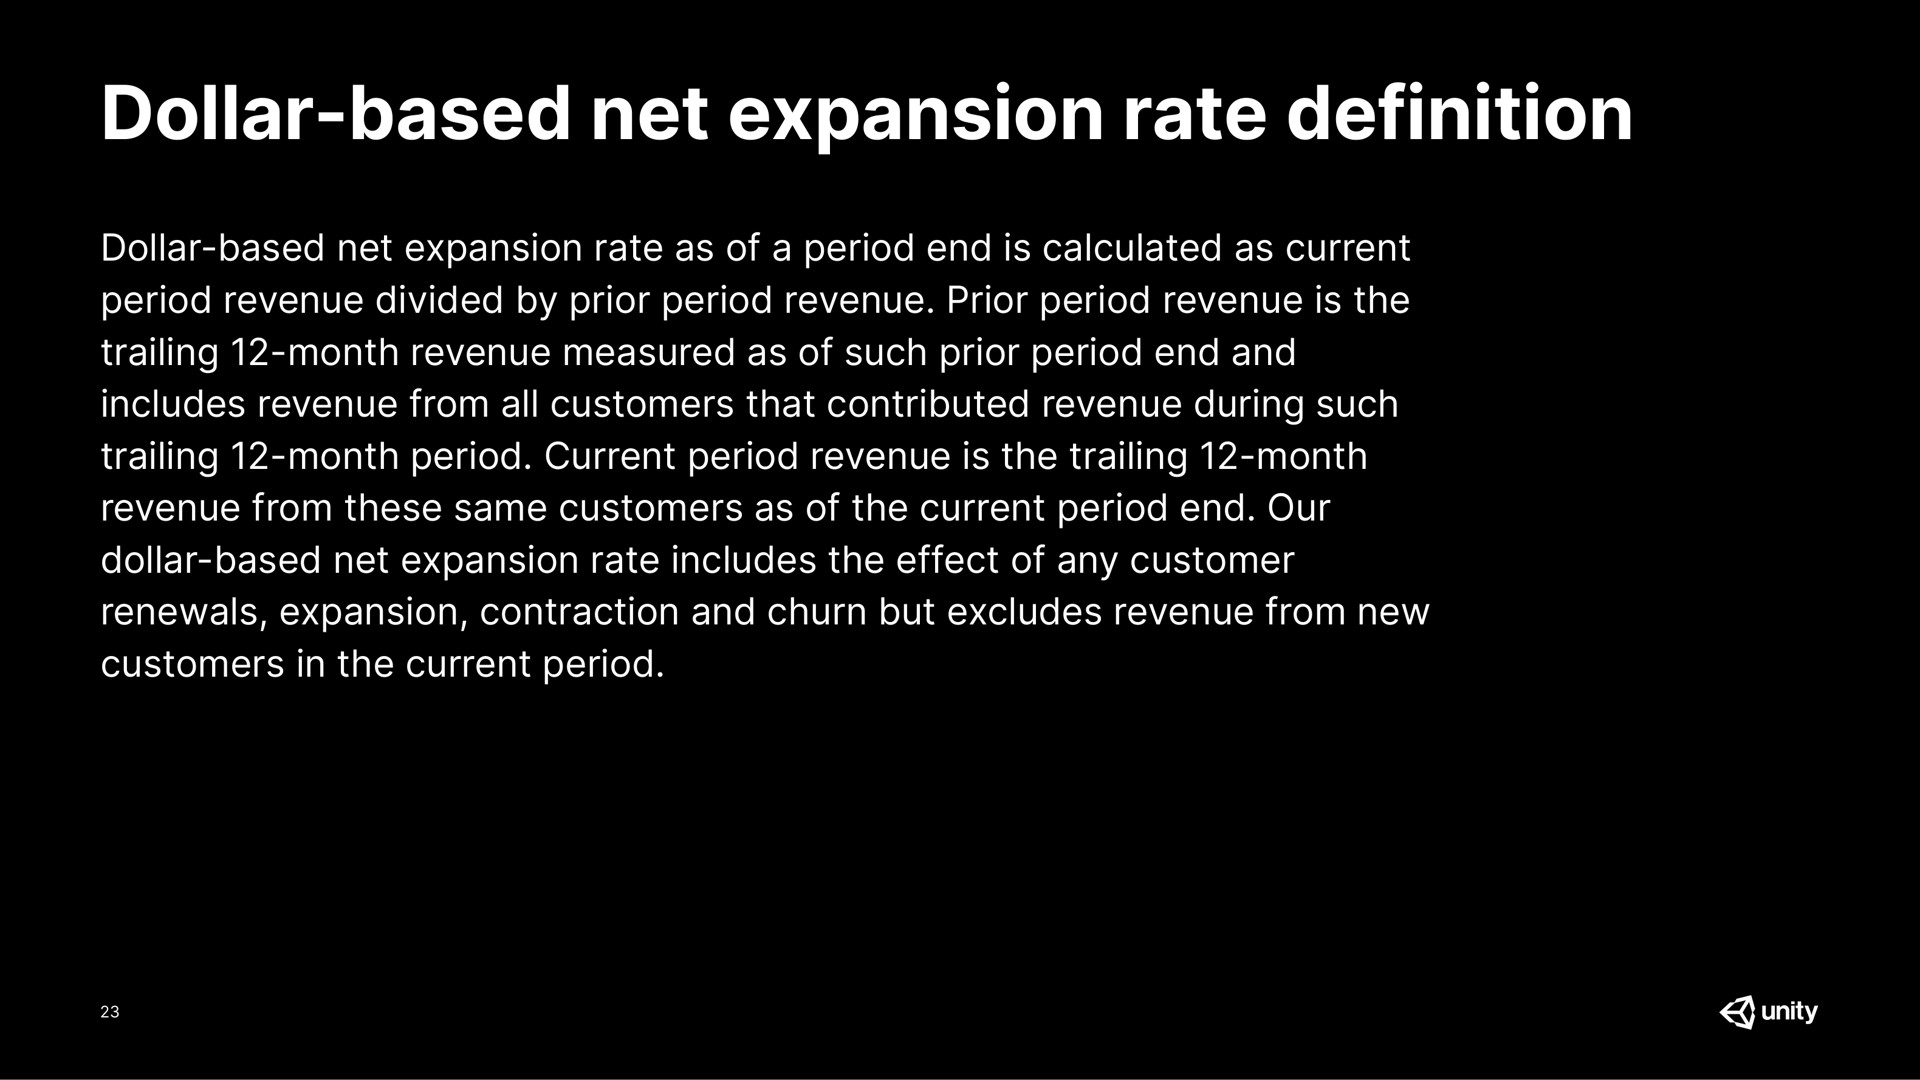 dollar based net expansion rate definition dollar based net expansion rate dollar based net expansion rate as of a period end is calculated as current period revenue divided by prior period revenue prior period revenue is the trailing month revenue measured as of such prior period end and includes revenue from all customers that contributed revenue during such trailing month period current period revenue is the trailing month revenue from these same customers as of the current period end our dollar based net expansion rate includes the effect of any customer renewals expansion contraction and churn but excludes revenue from new customers in the current period | Unity Software